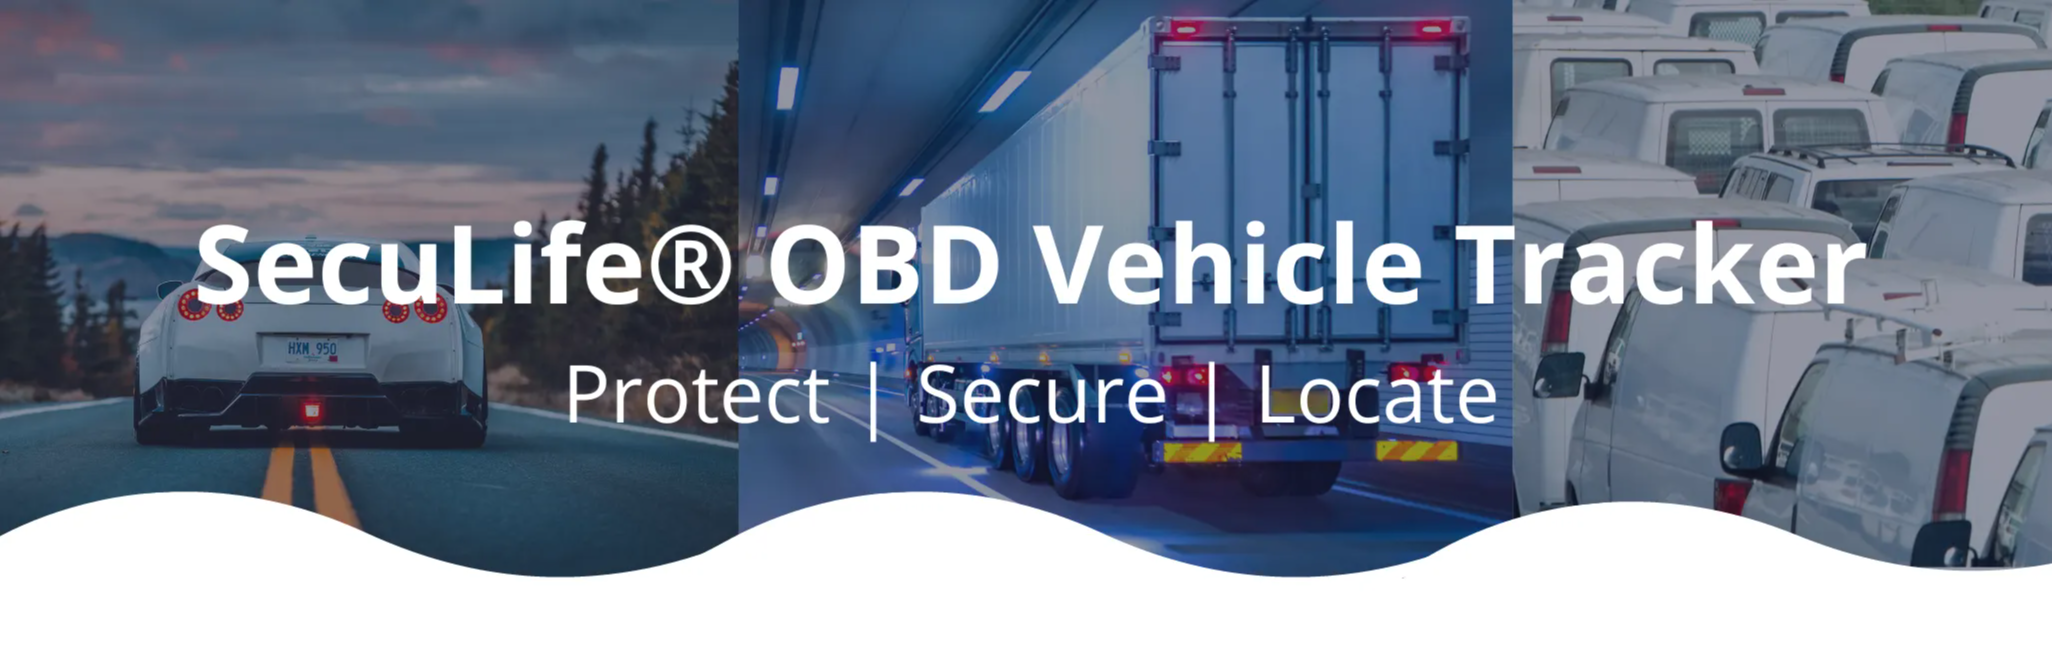 Header for the OBD Vehicle Tracker